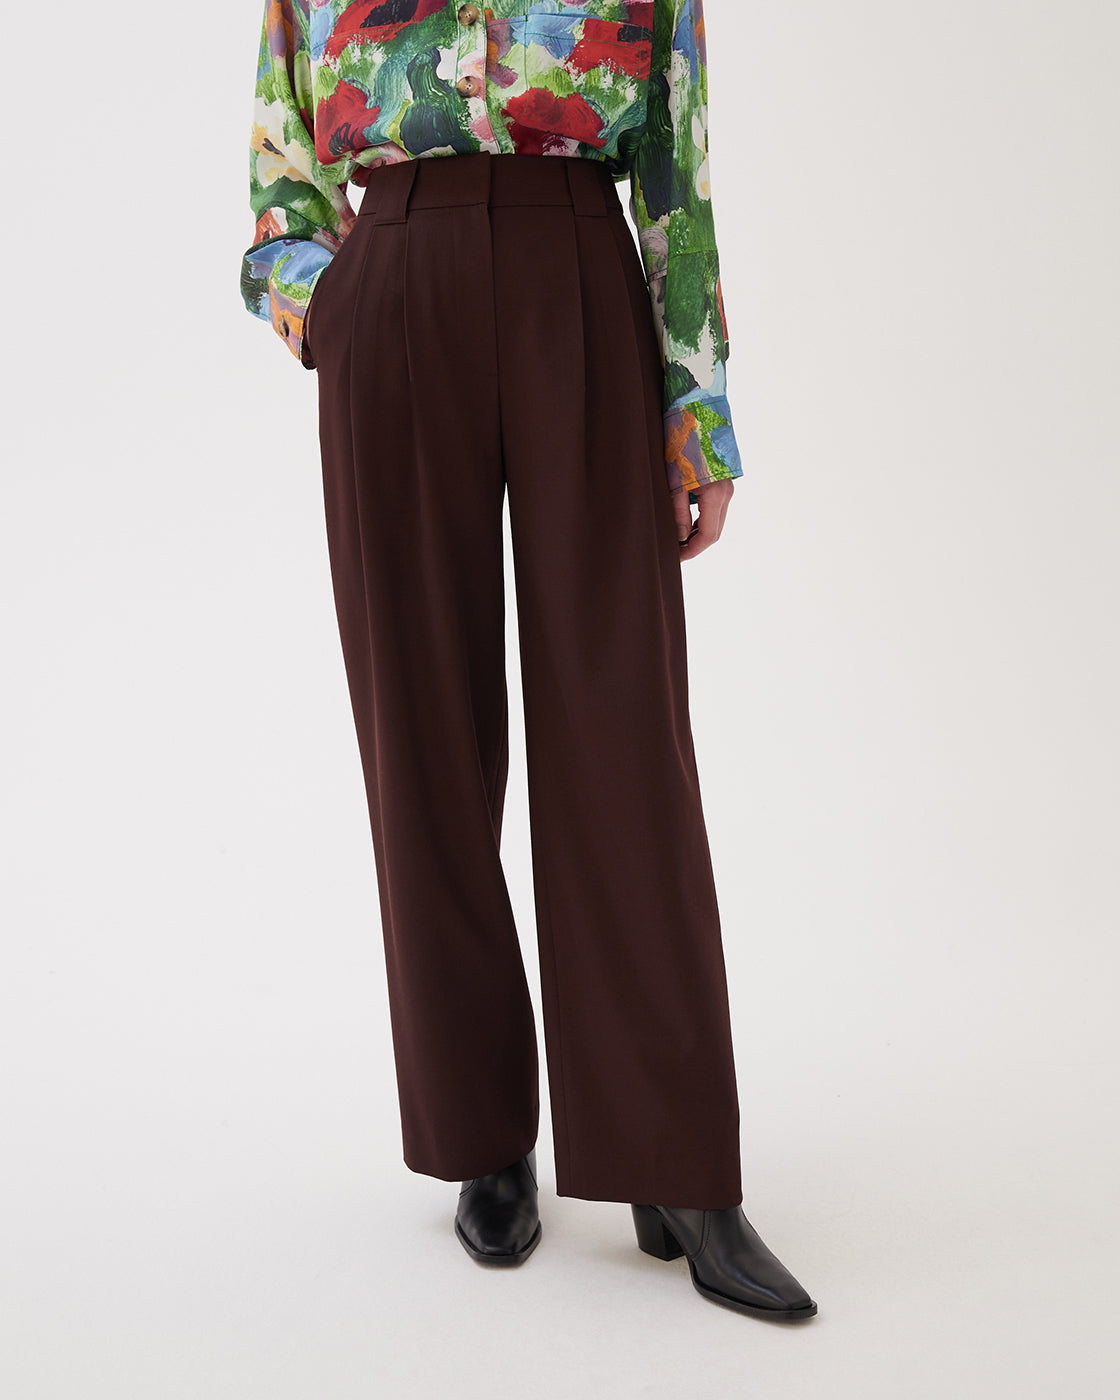 Freya Trousers Wool Blend Twill Burgundy - Special Price